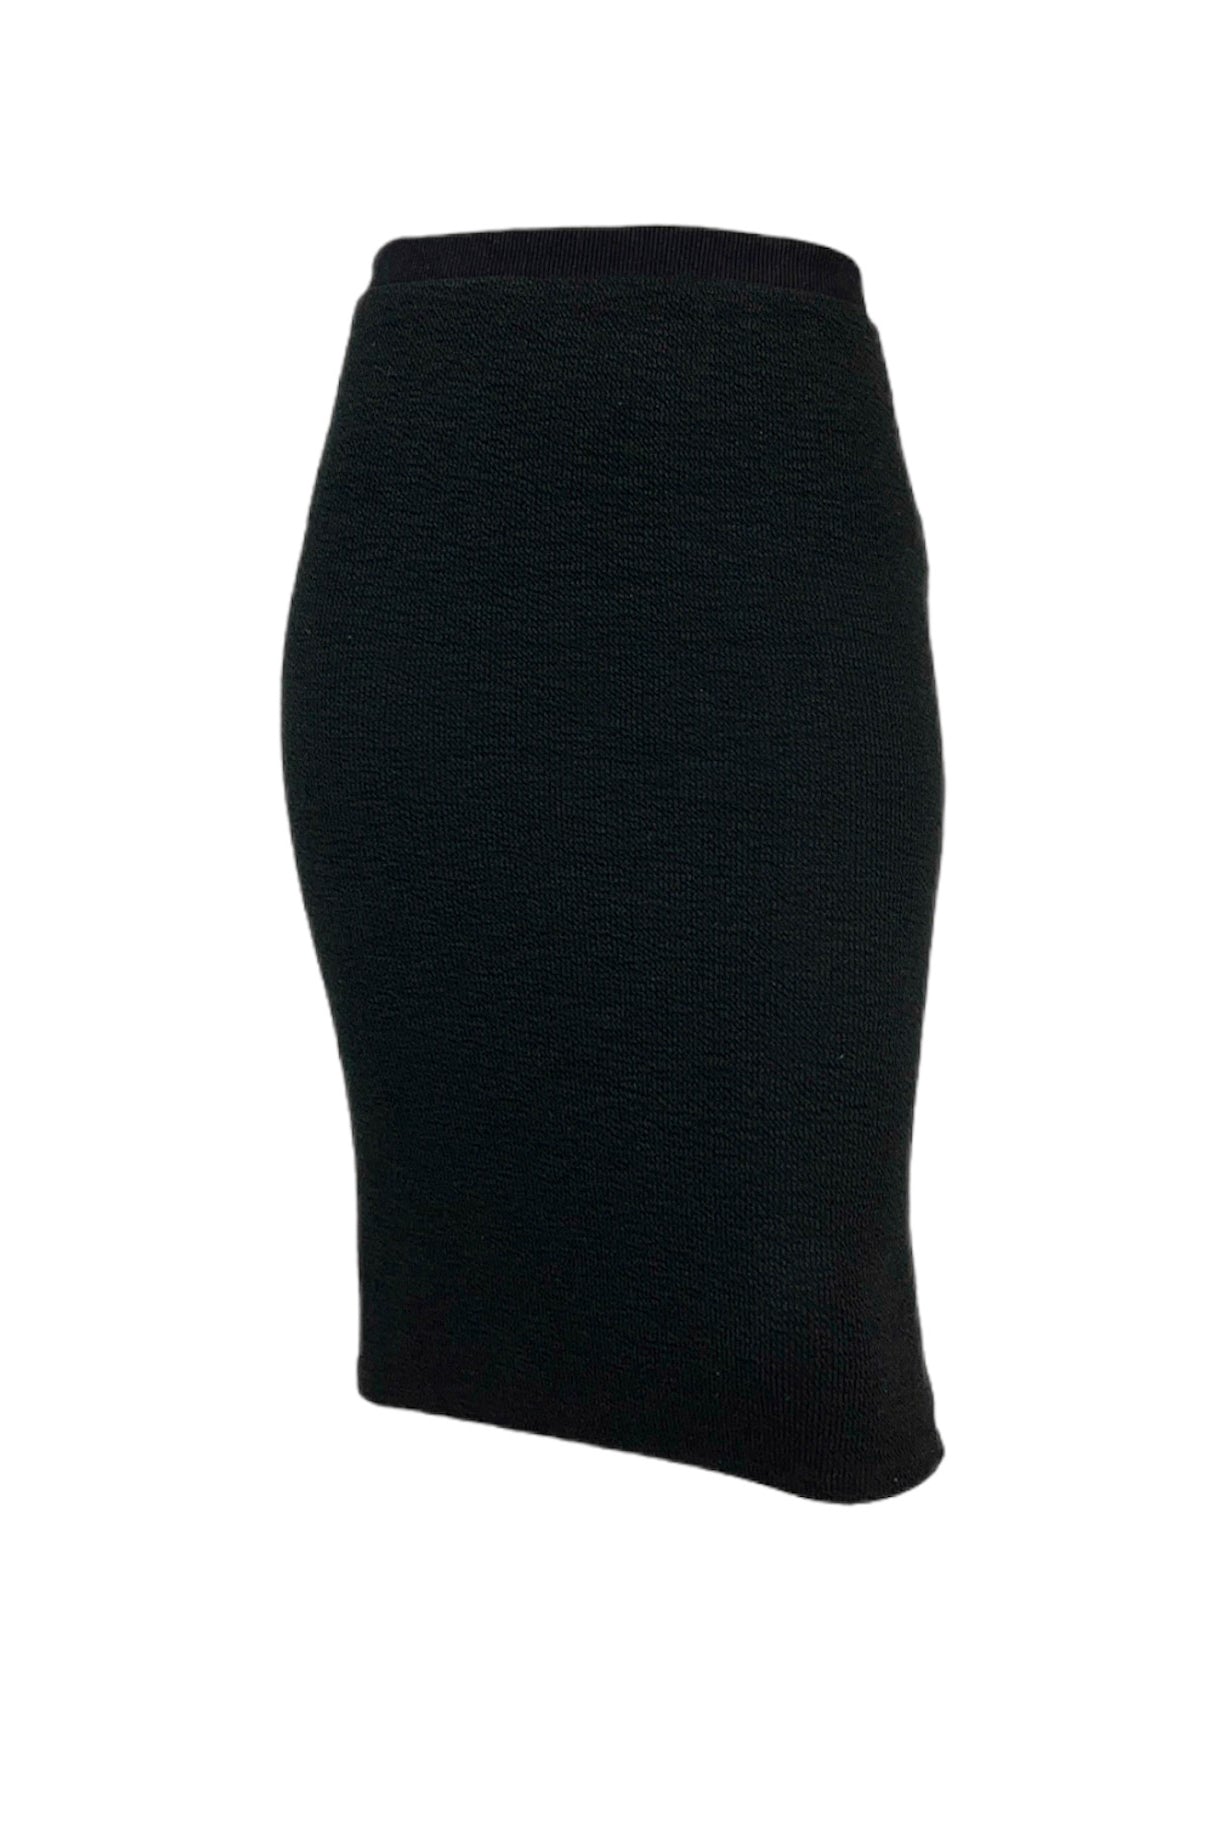 Load image into Gallery viewer, Glow Fashion Boutique Perfect Pencil Skirt
